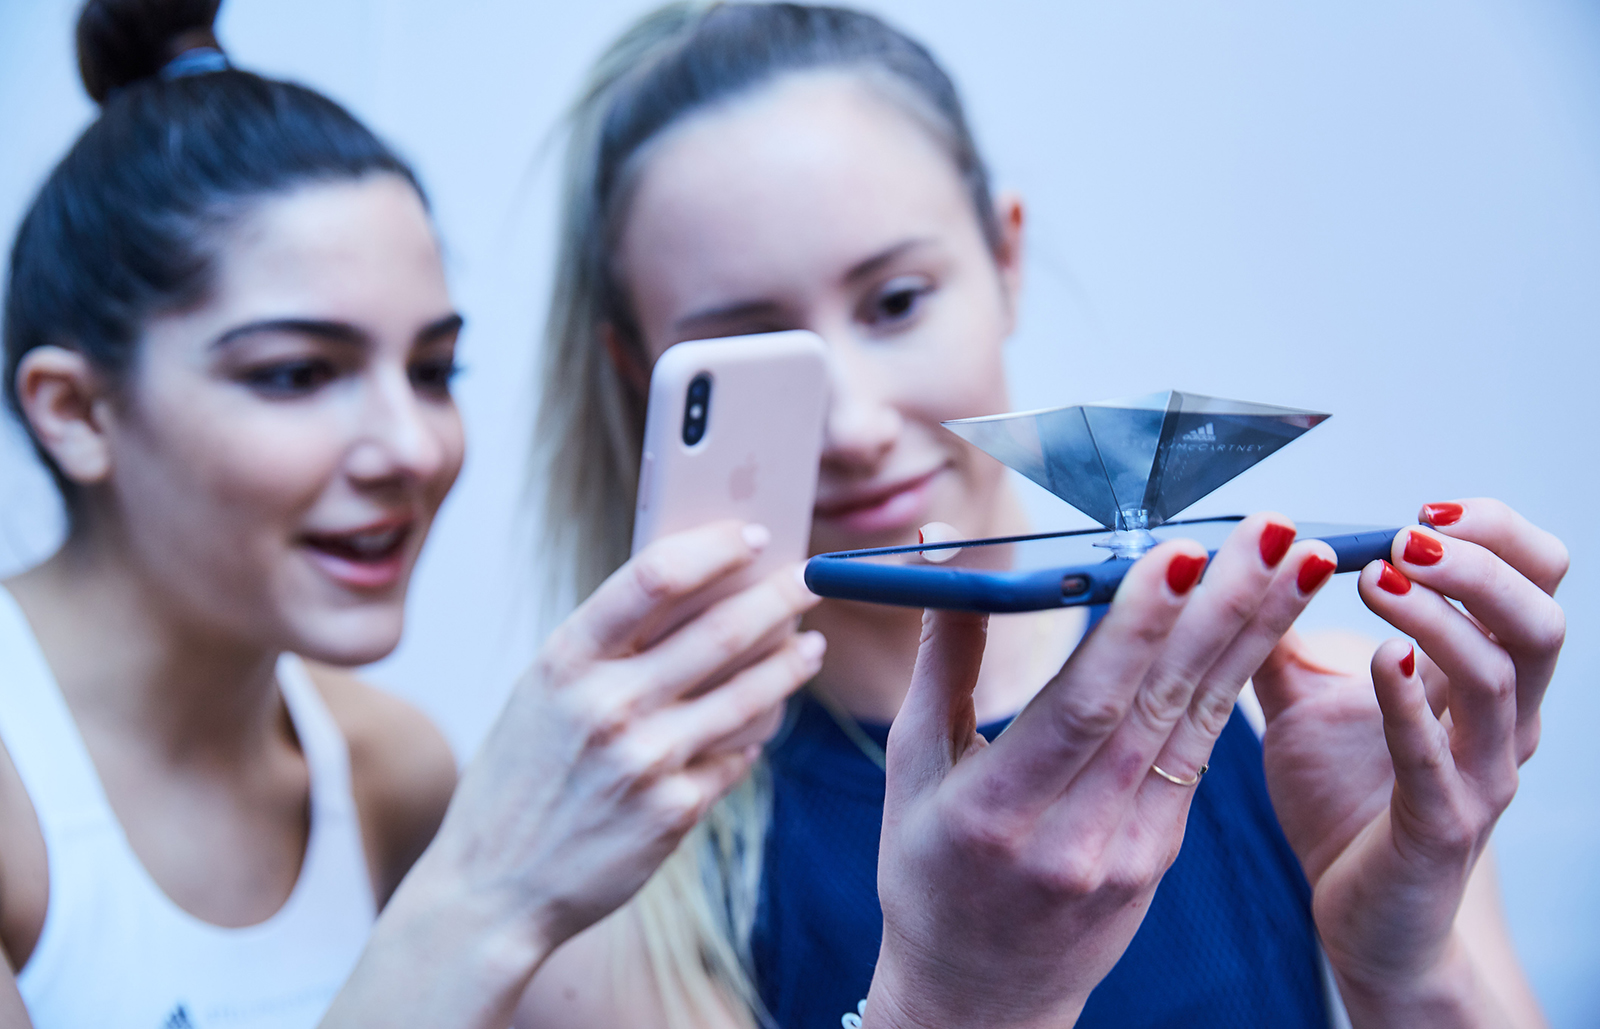 Two women look at a small mobile hologram device set up on one phone held horizontally. One woman looks at the device through the screen of a second phone.